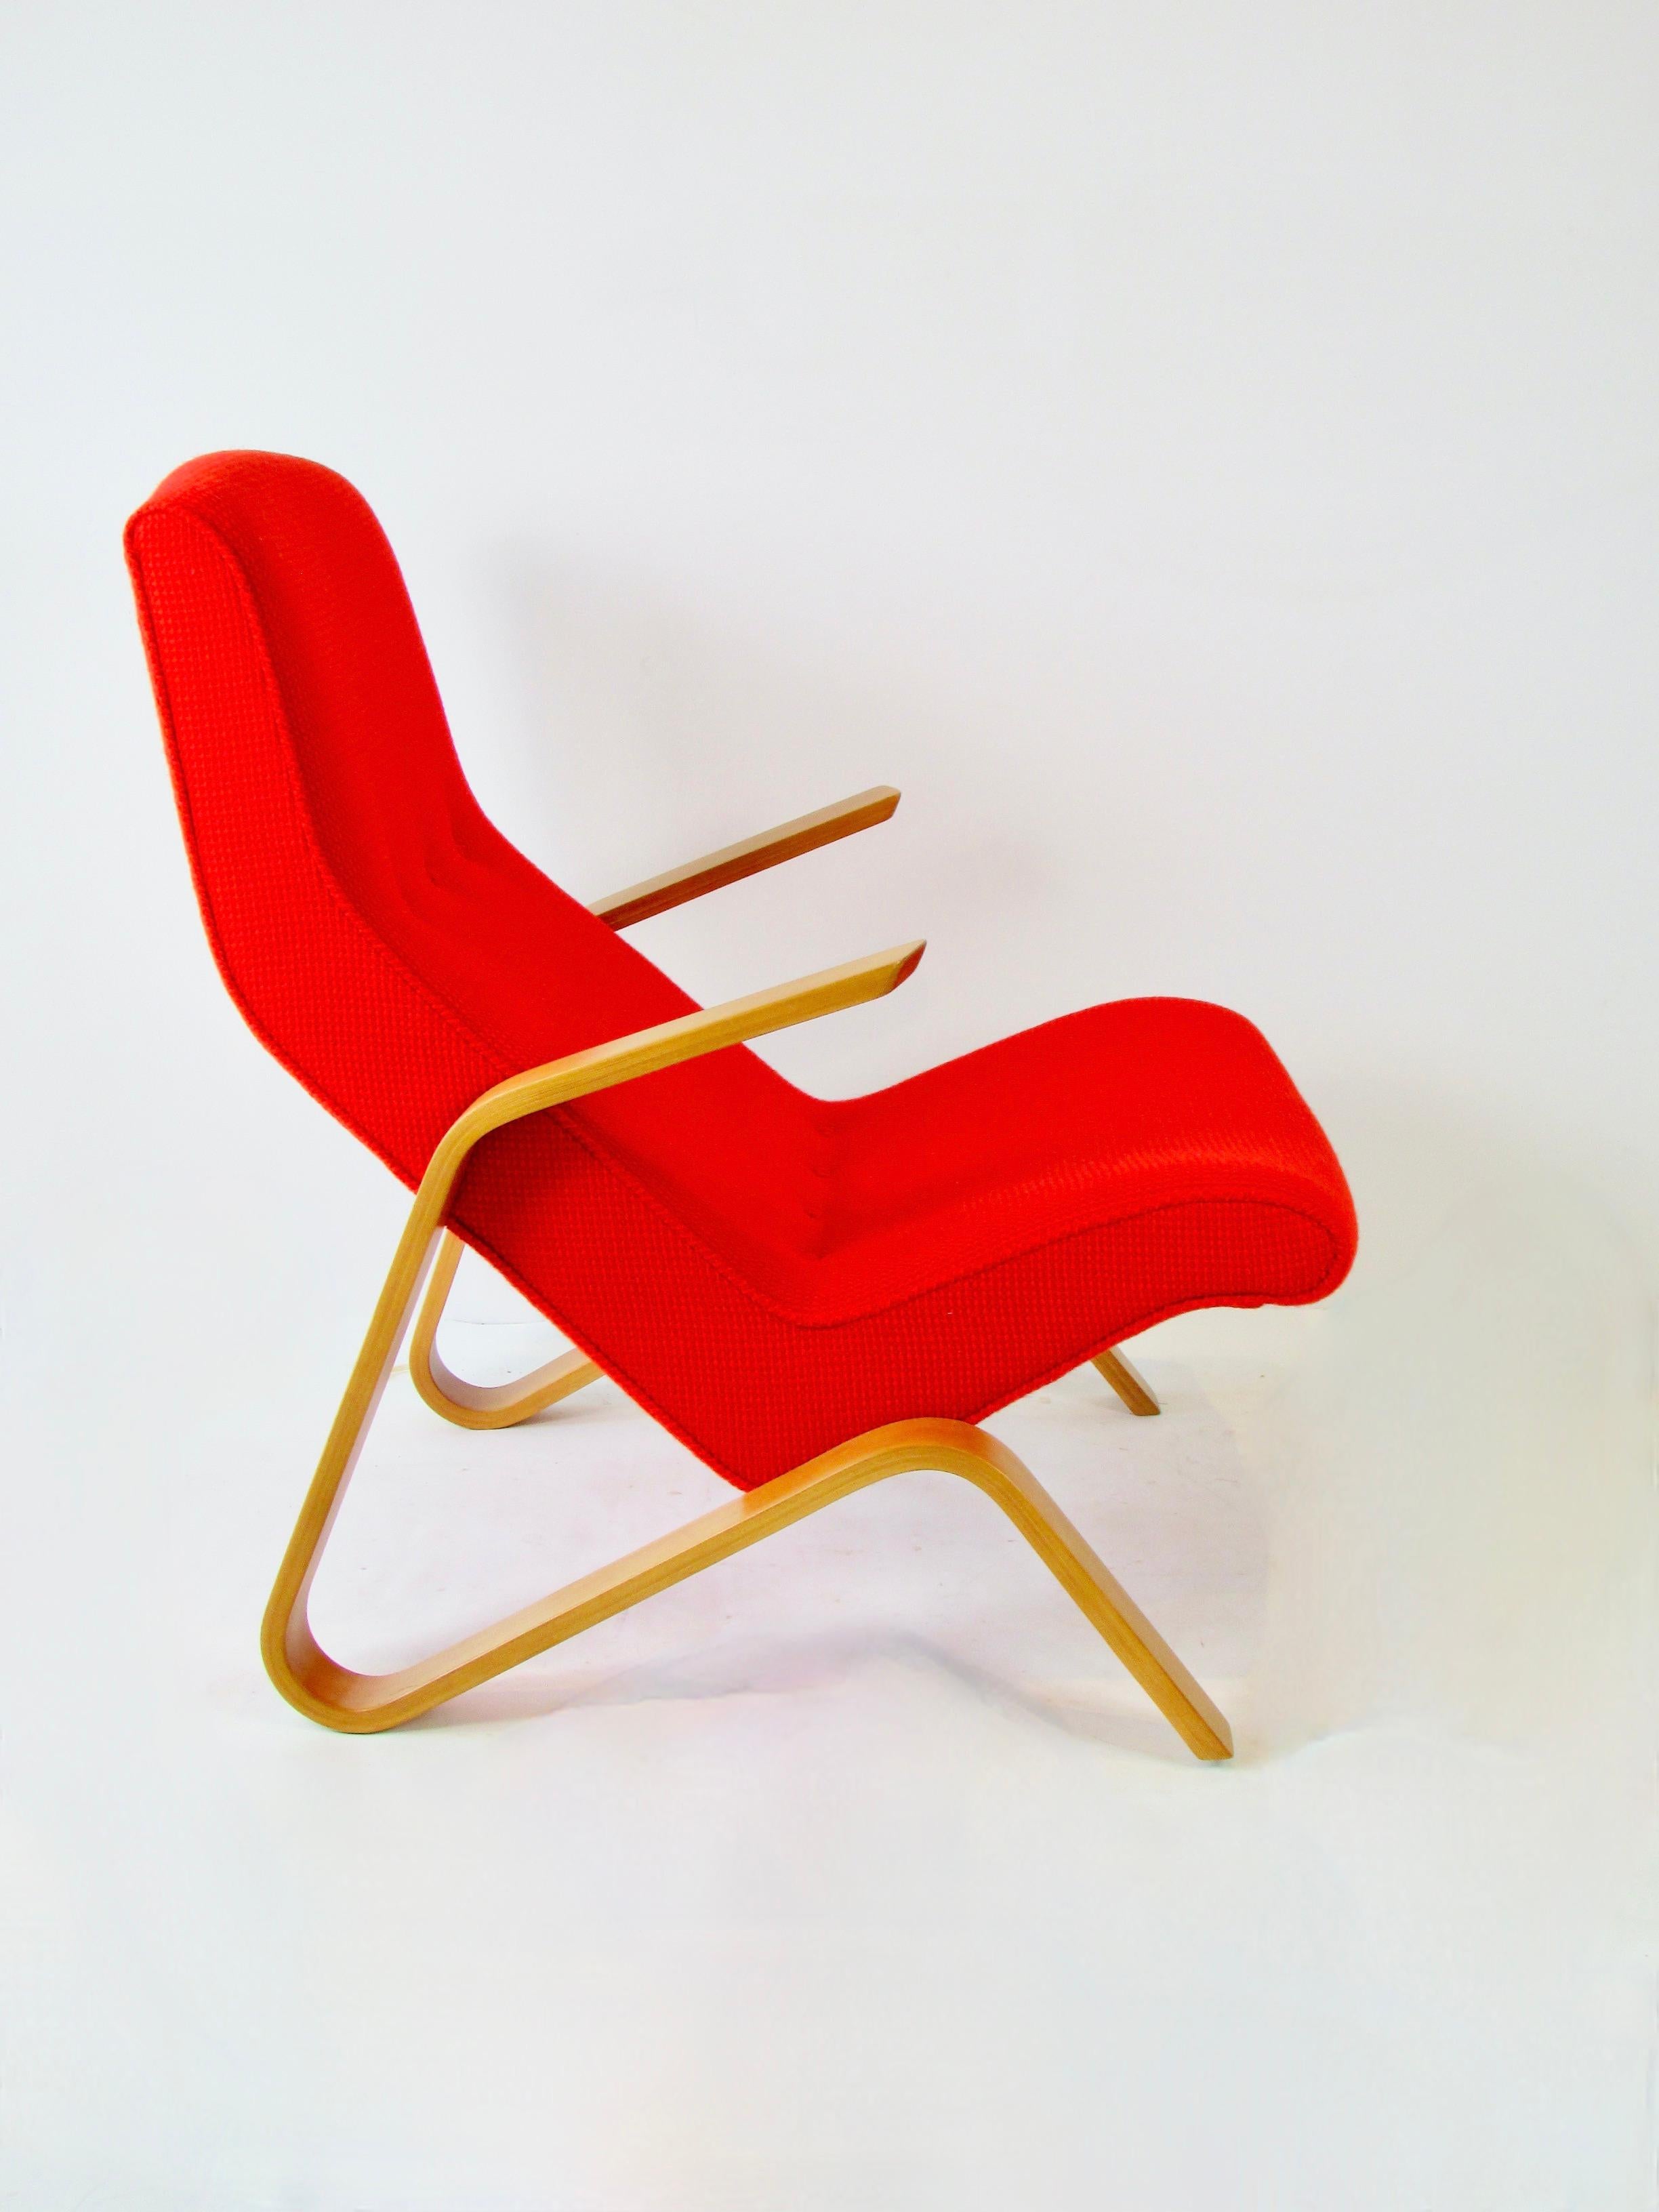 20th Century Recently Restored Eero Saarinen for Knoll Model 61 Grasshopper Lounge Chair For Sale